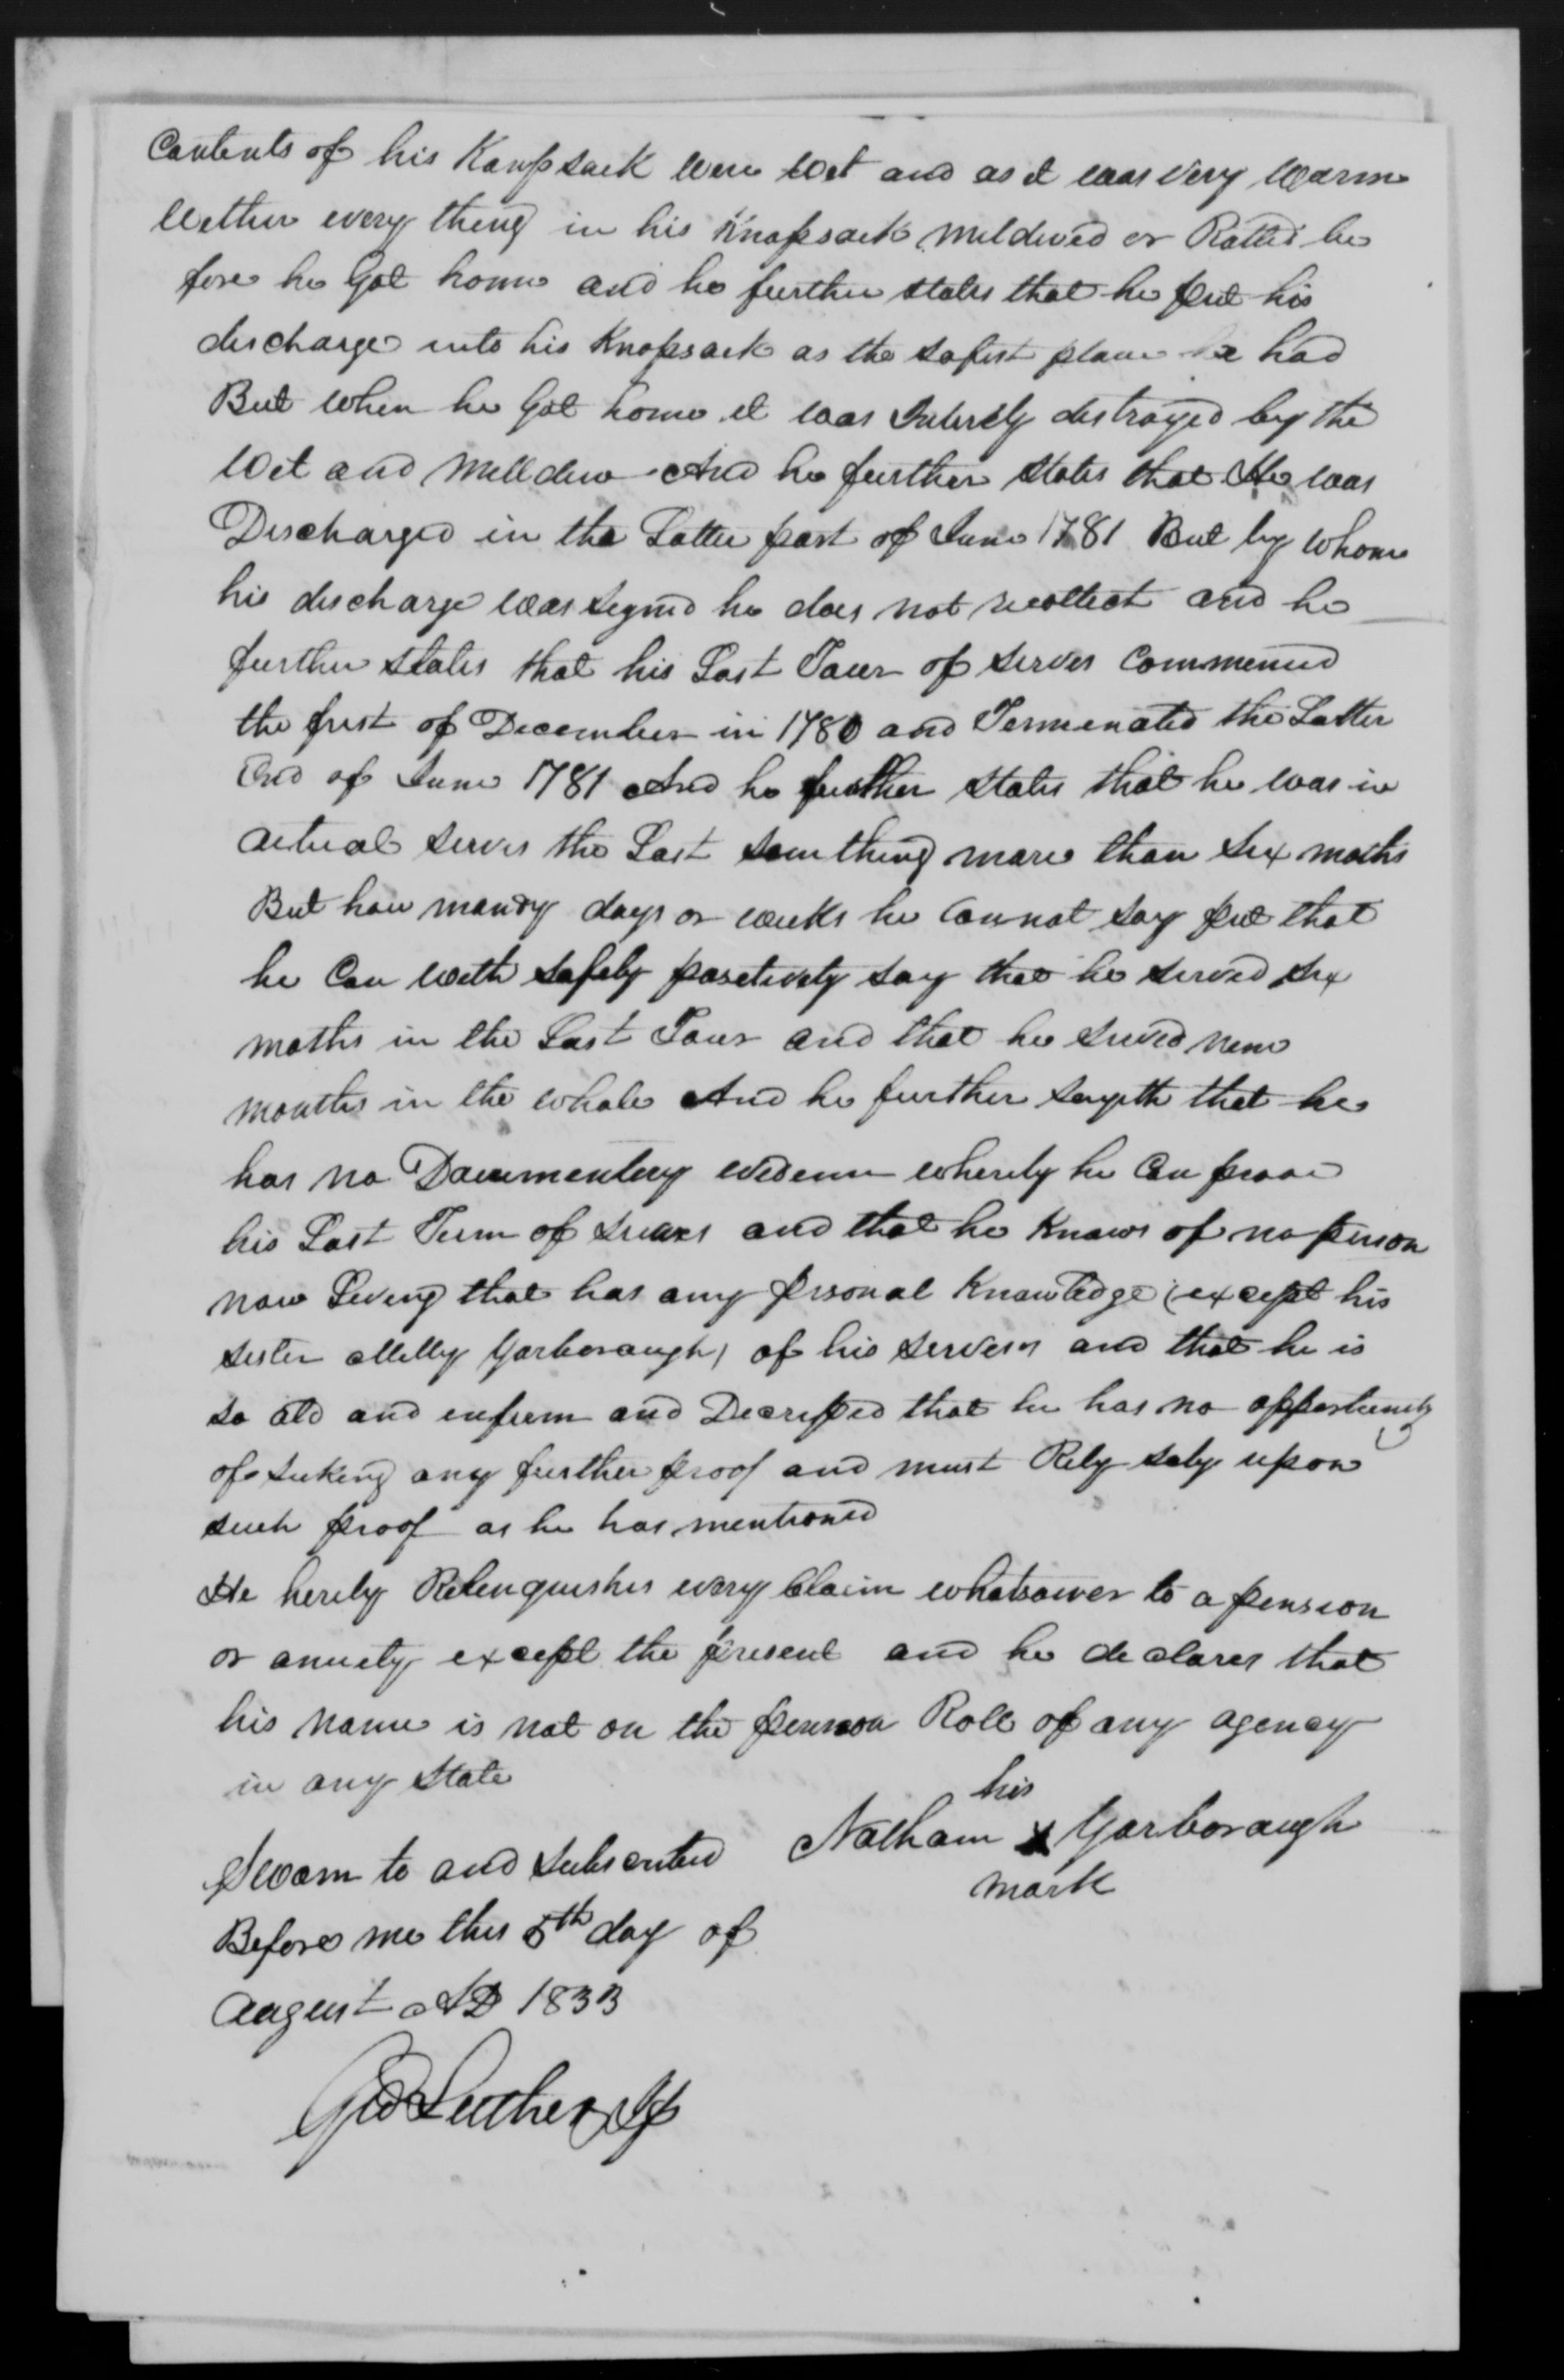 Application for a Veteran's Pension from Nathan Yarborough, 5 August 1833, page 4